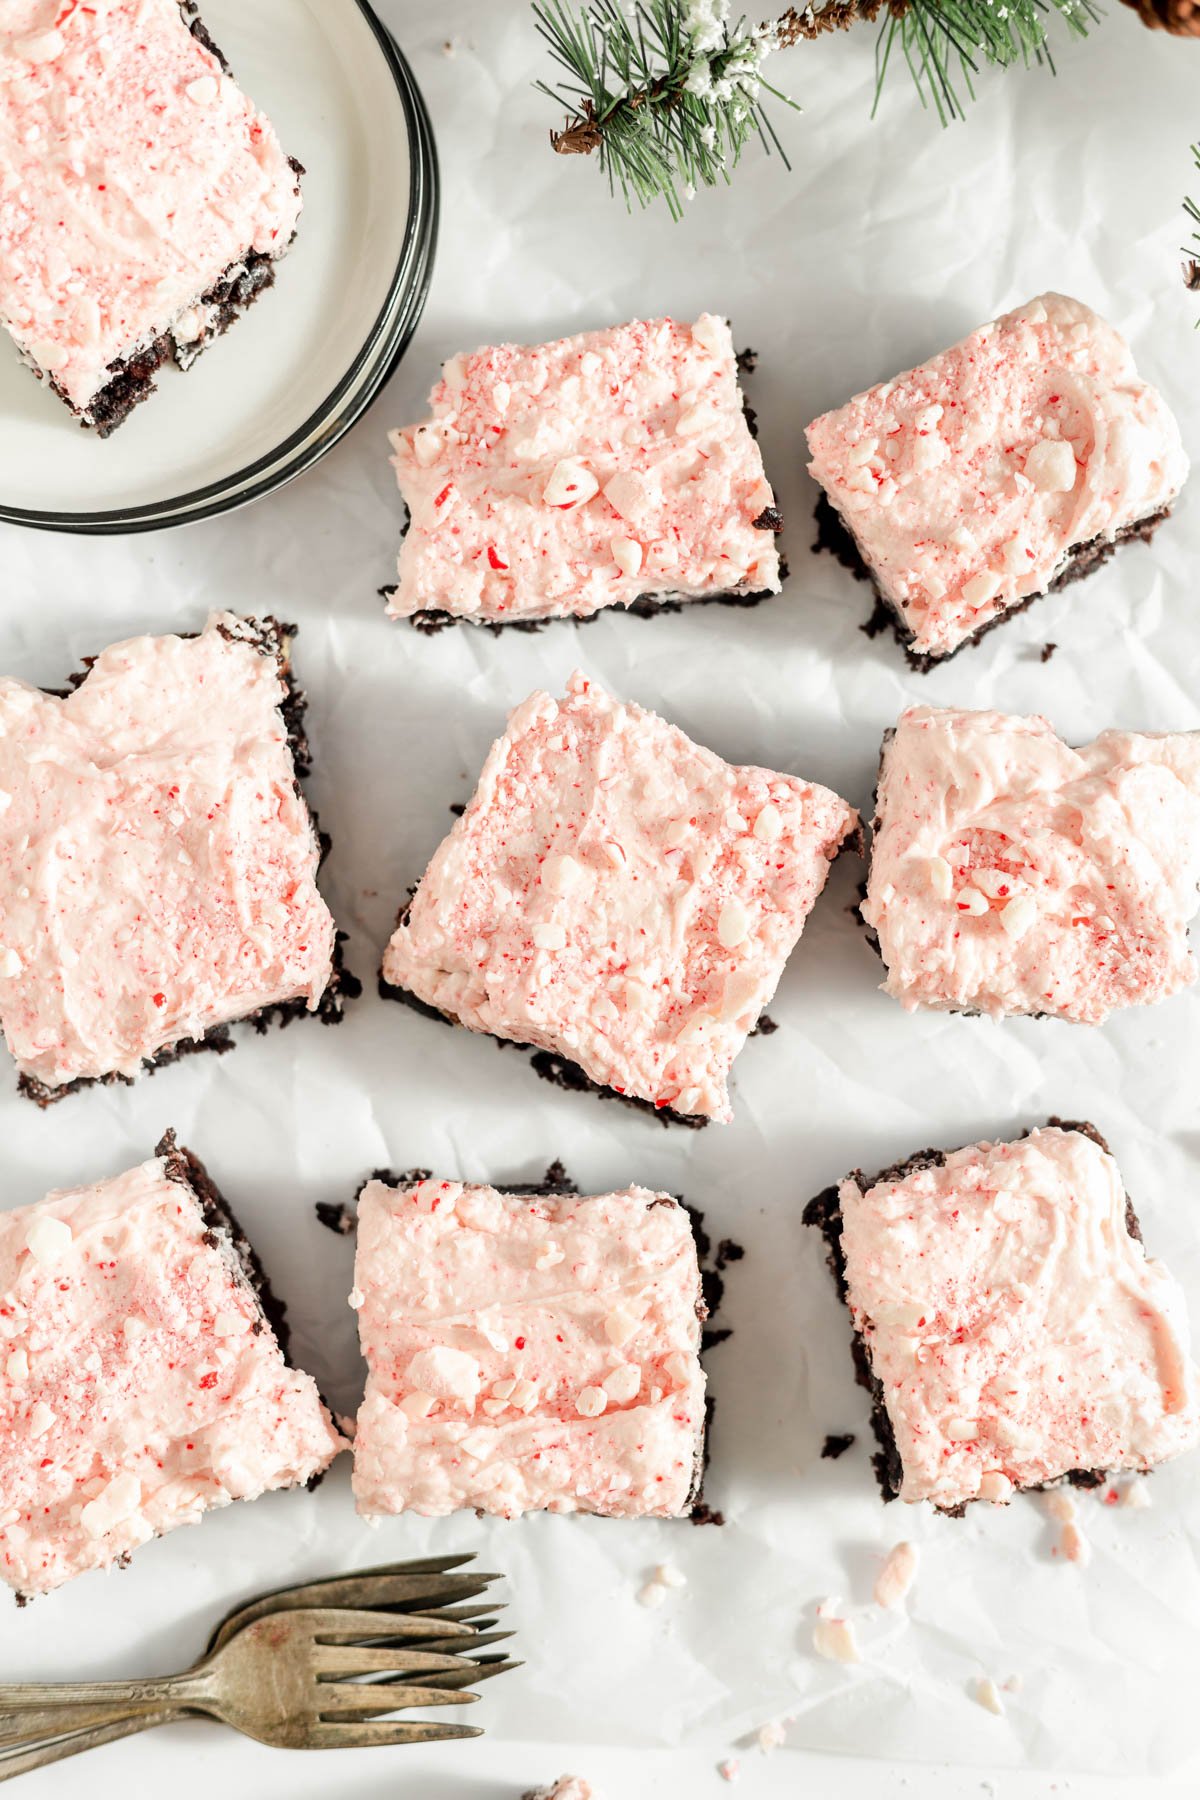 An image of brownies frosted with peppermint frosting with forks next to them.